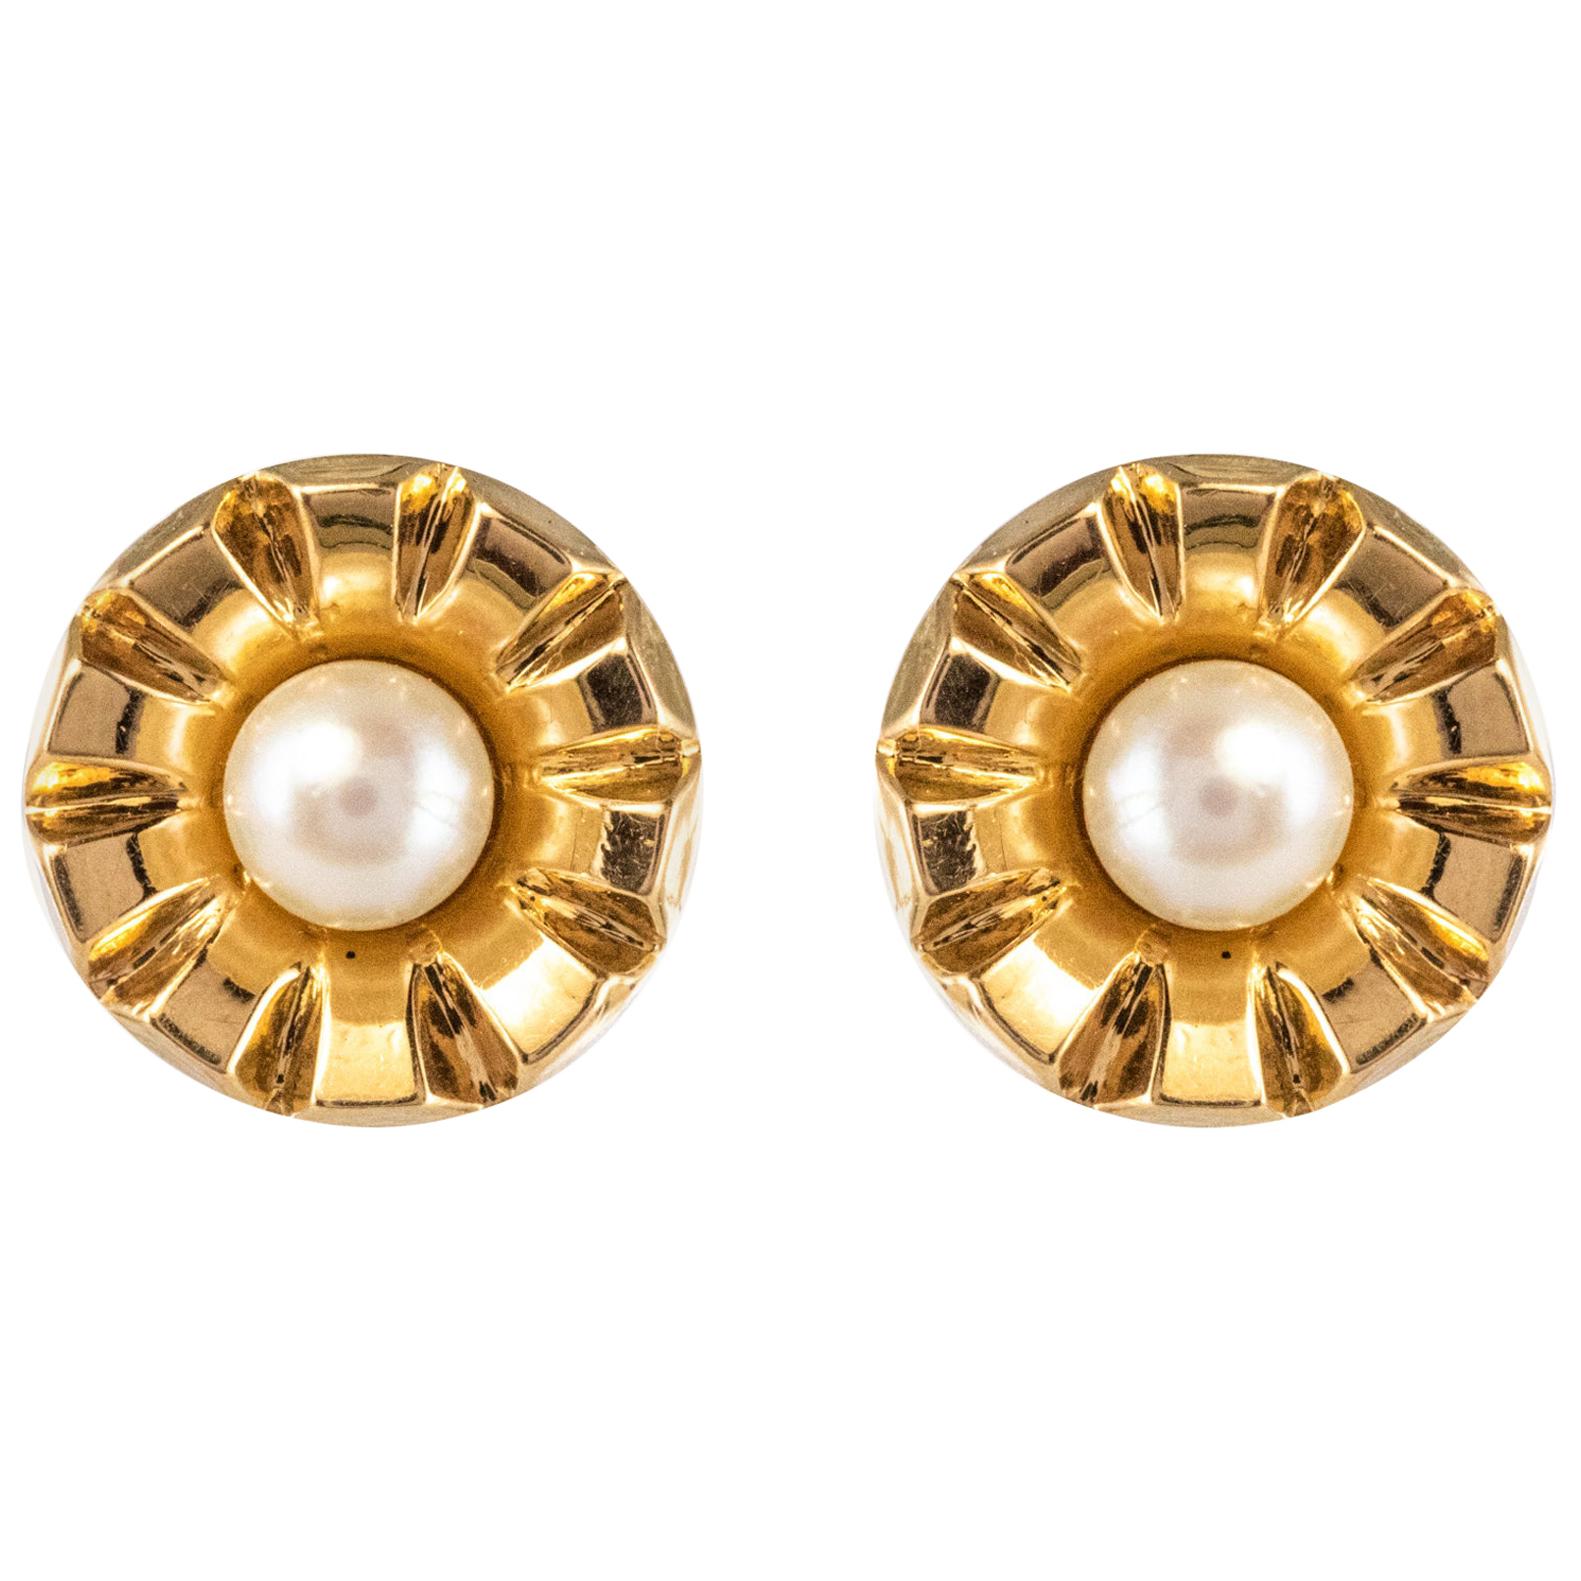 French 1960s Cultured Pearl 18 Karat Yellow Gold Stud Earrings